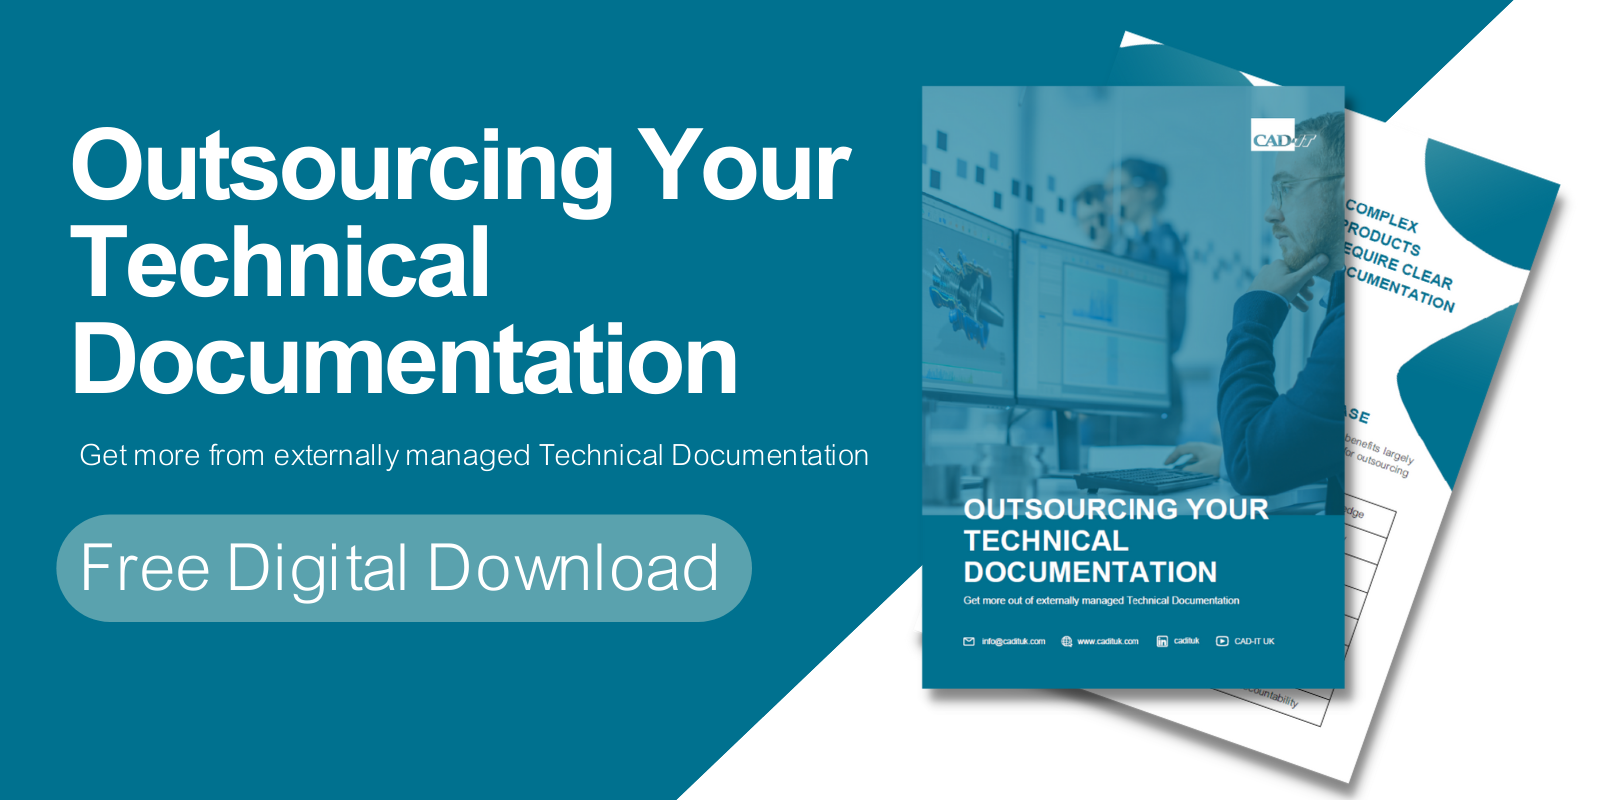 Free content download for 'outsourcing your technical documentation' pdf